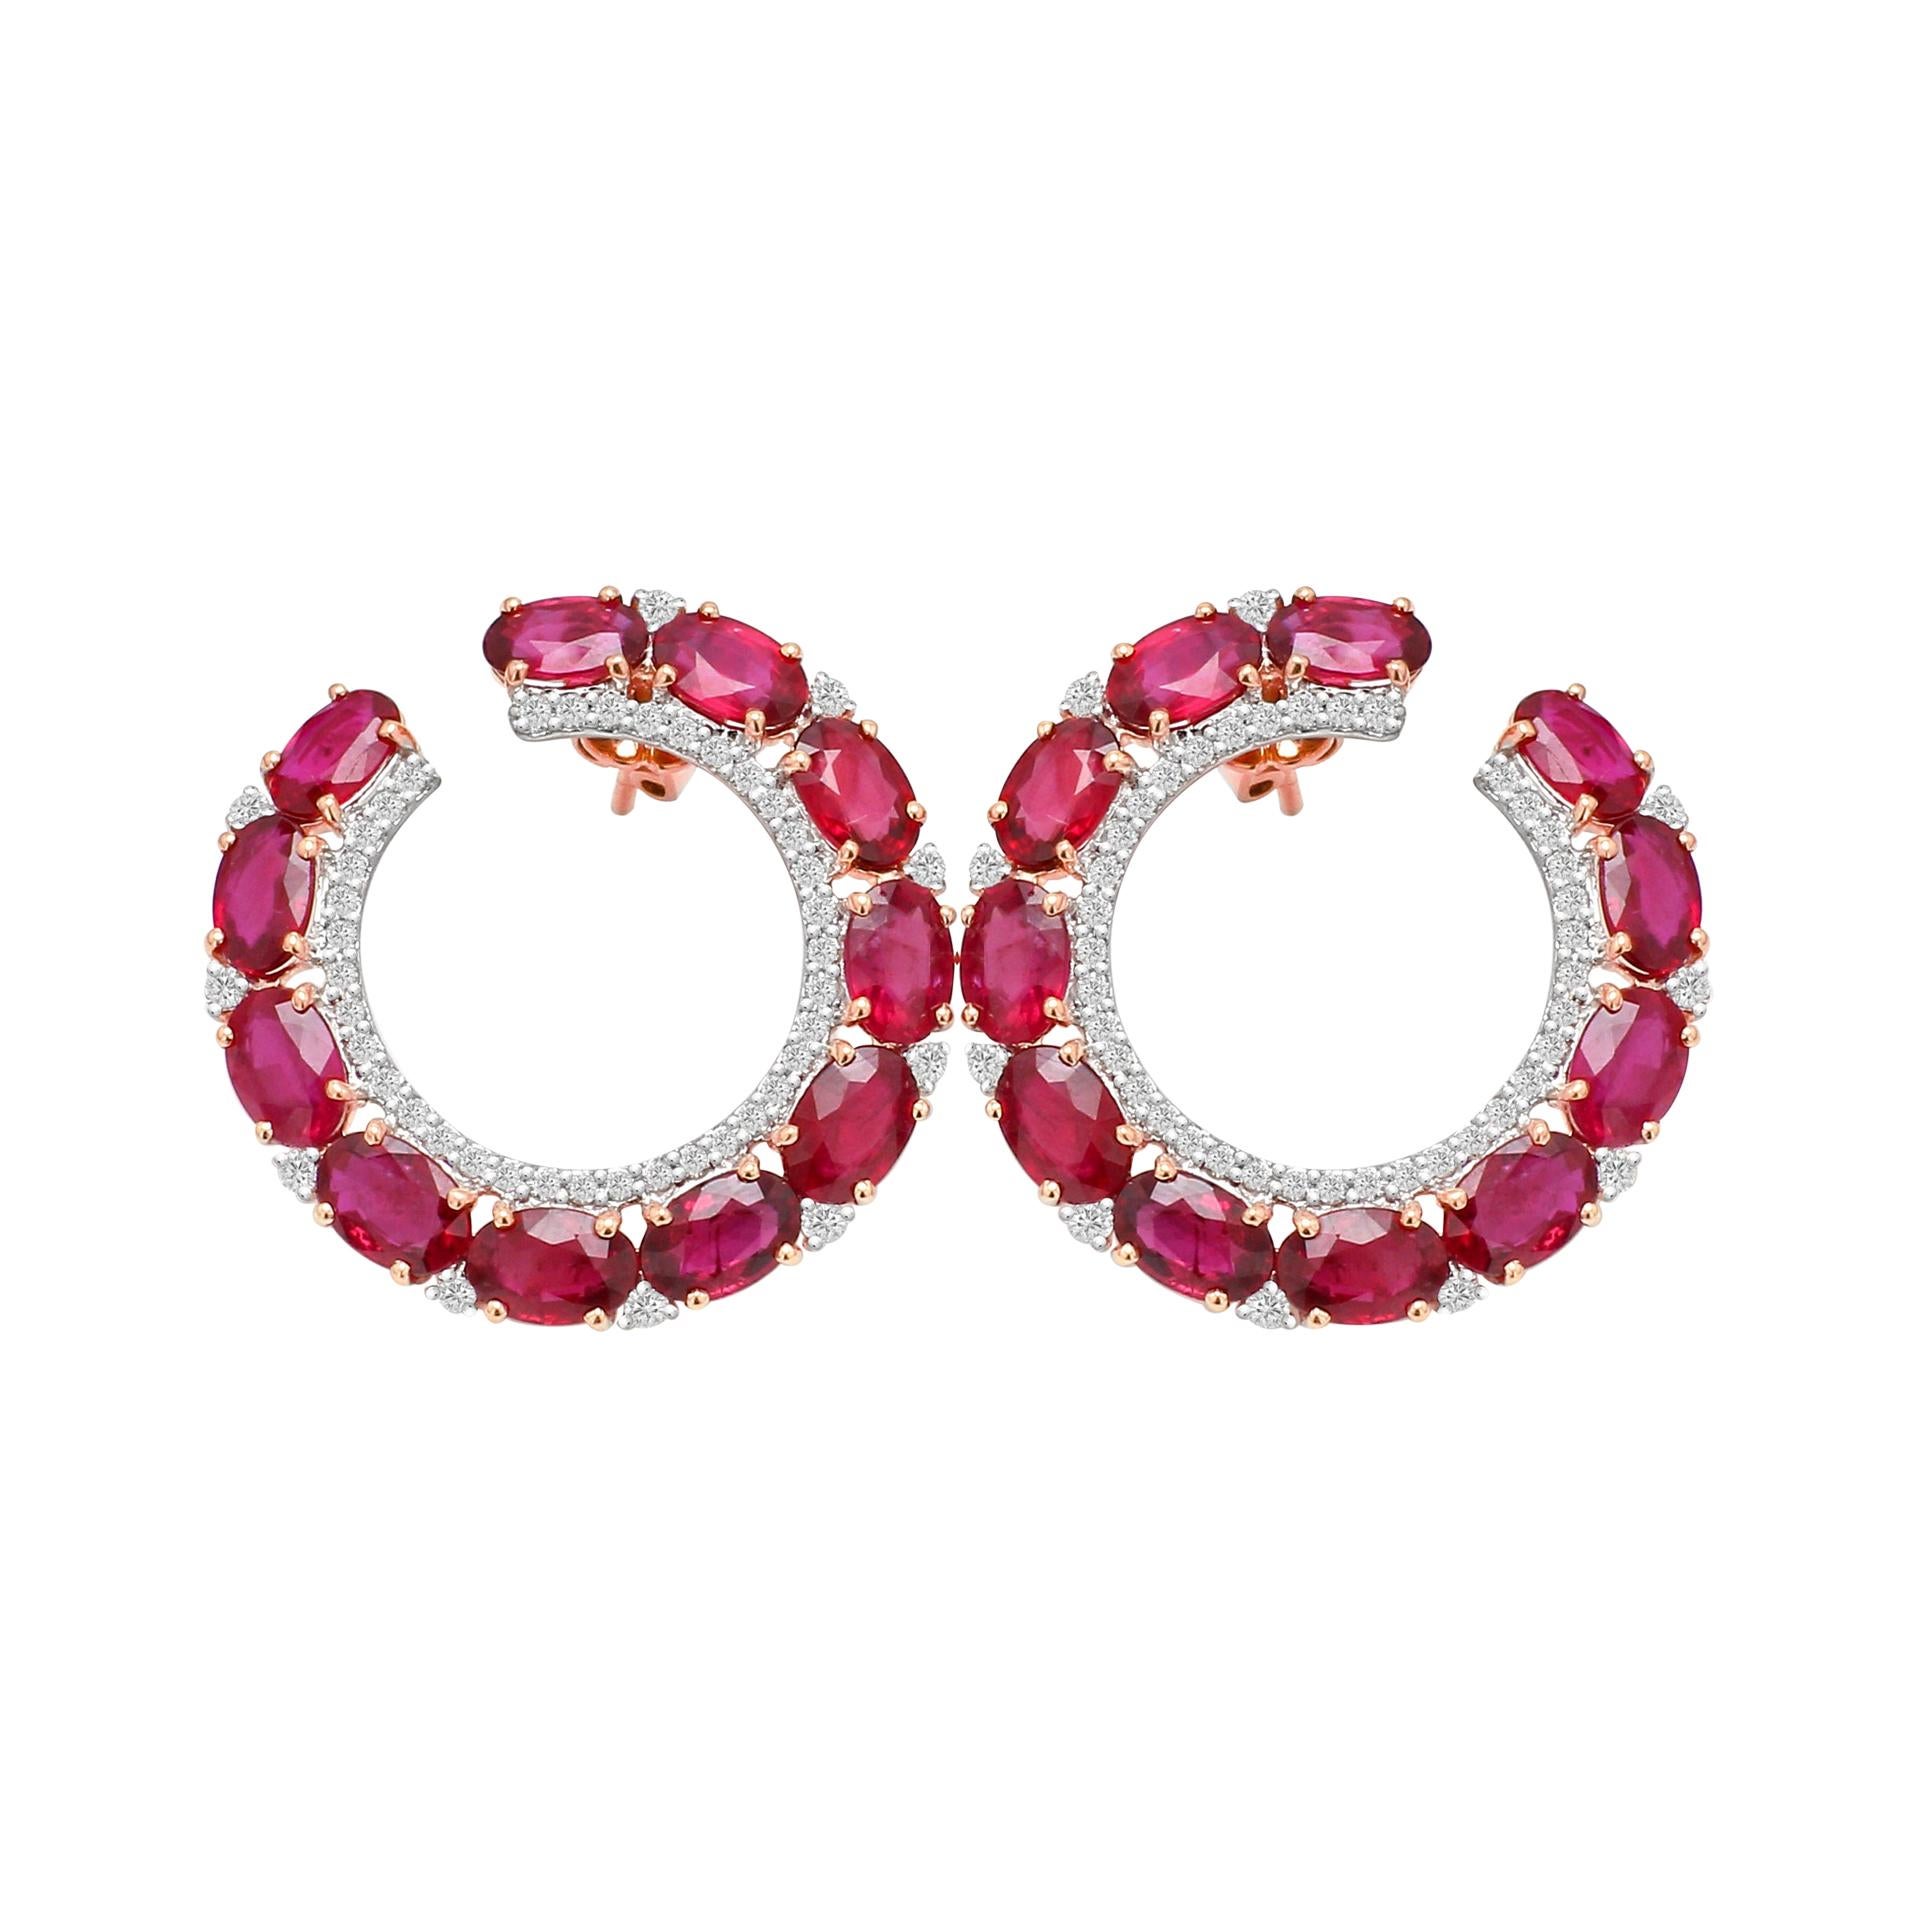 18 Karat Rose Gold 12.72 Carat Ruby and Diamond Contemporary Hoop Earrings For Sale